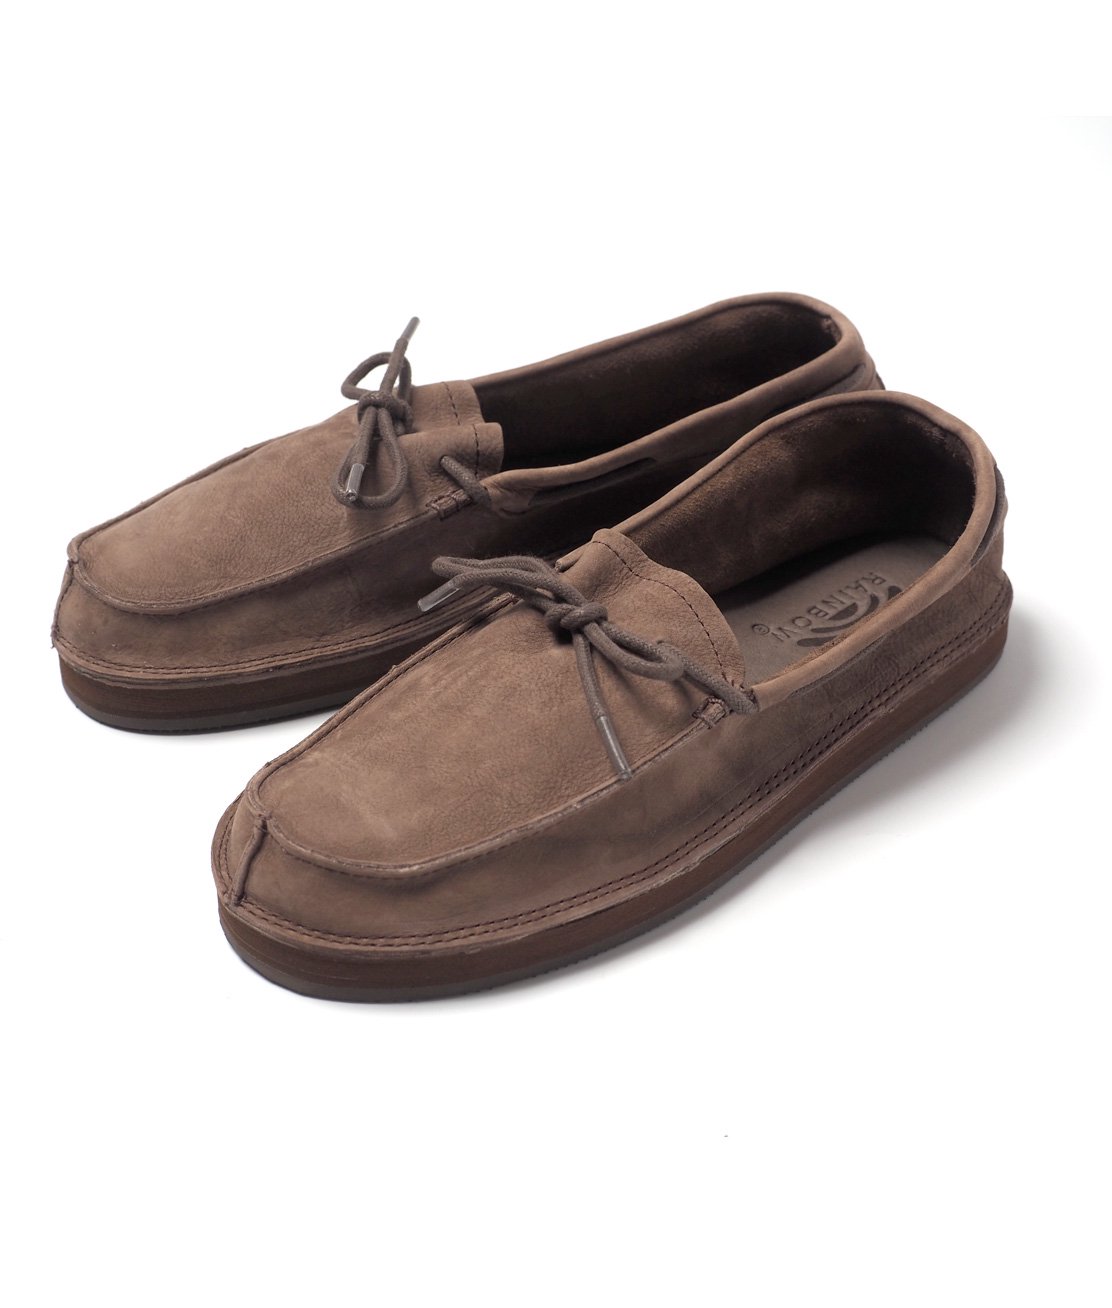 RAINBOW SANDALS】MOCCA LOAFER - EXPRESSO モカローファー シューズ